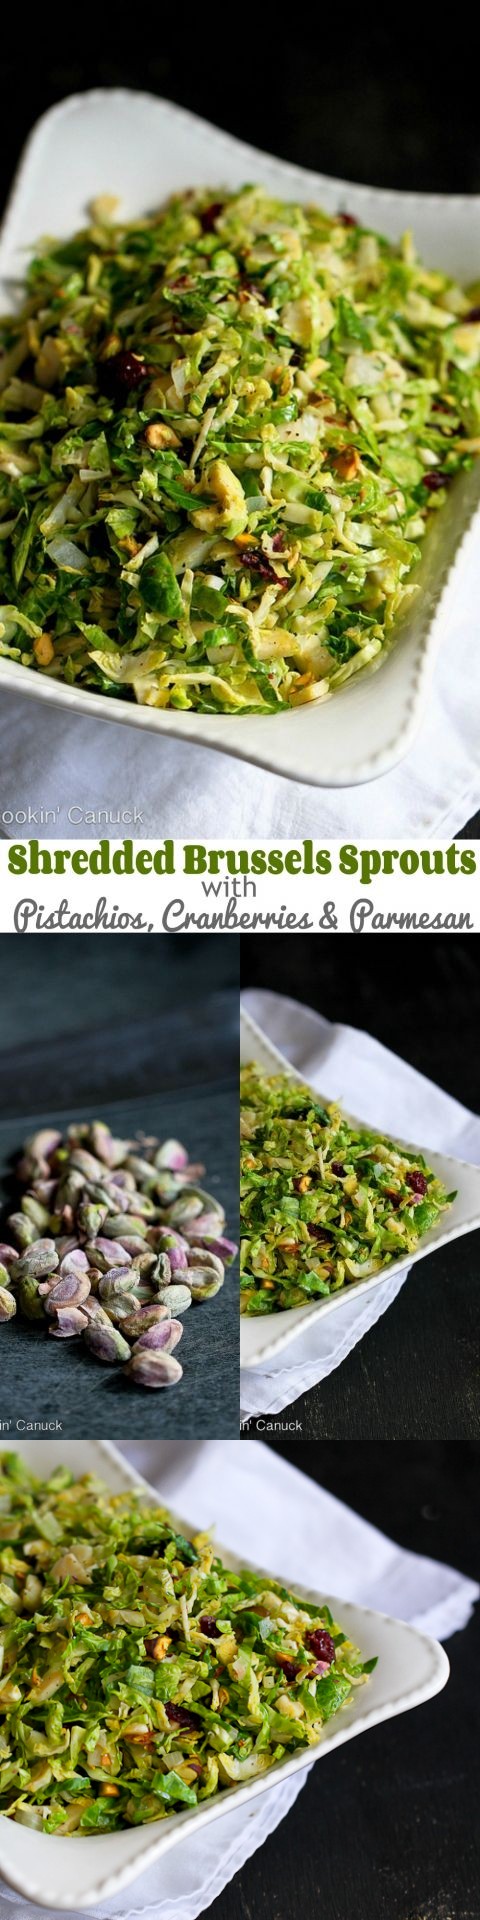 Shredded Brussels Sprouts with Pistachios, Cranberries & Parmesan